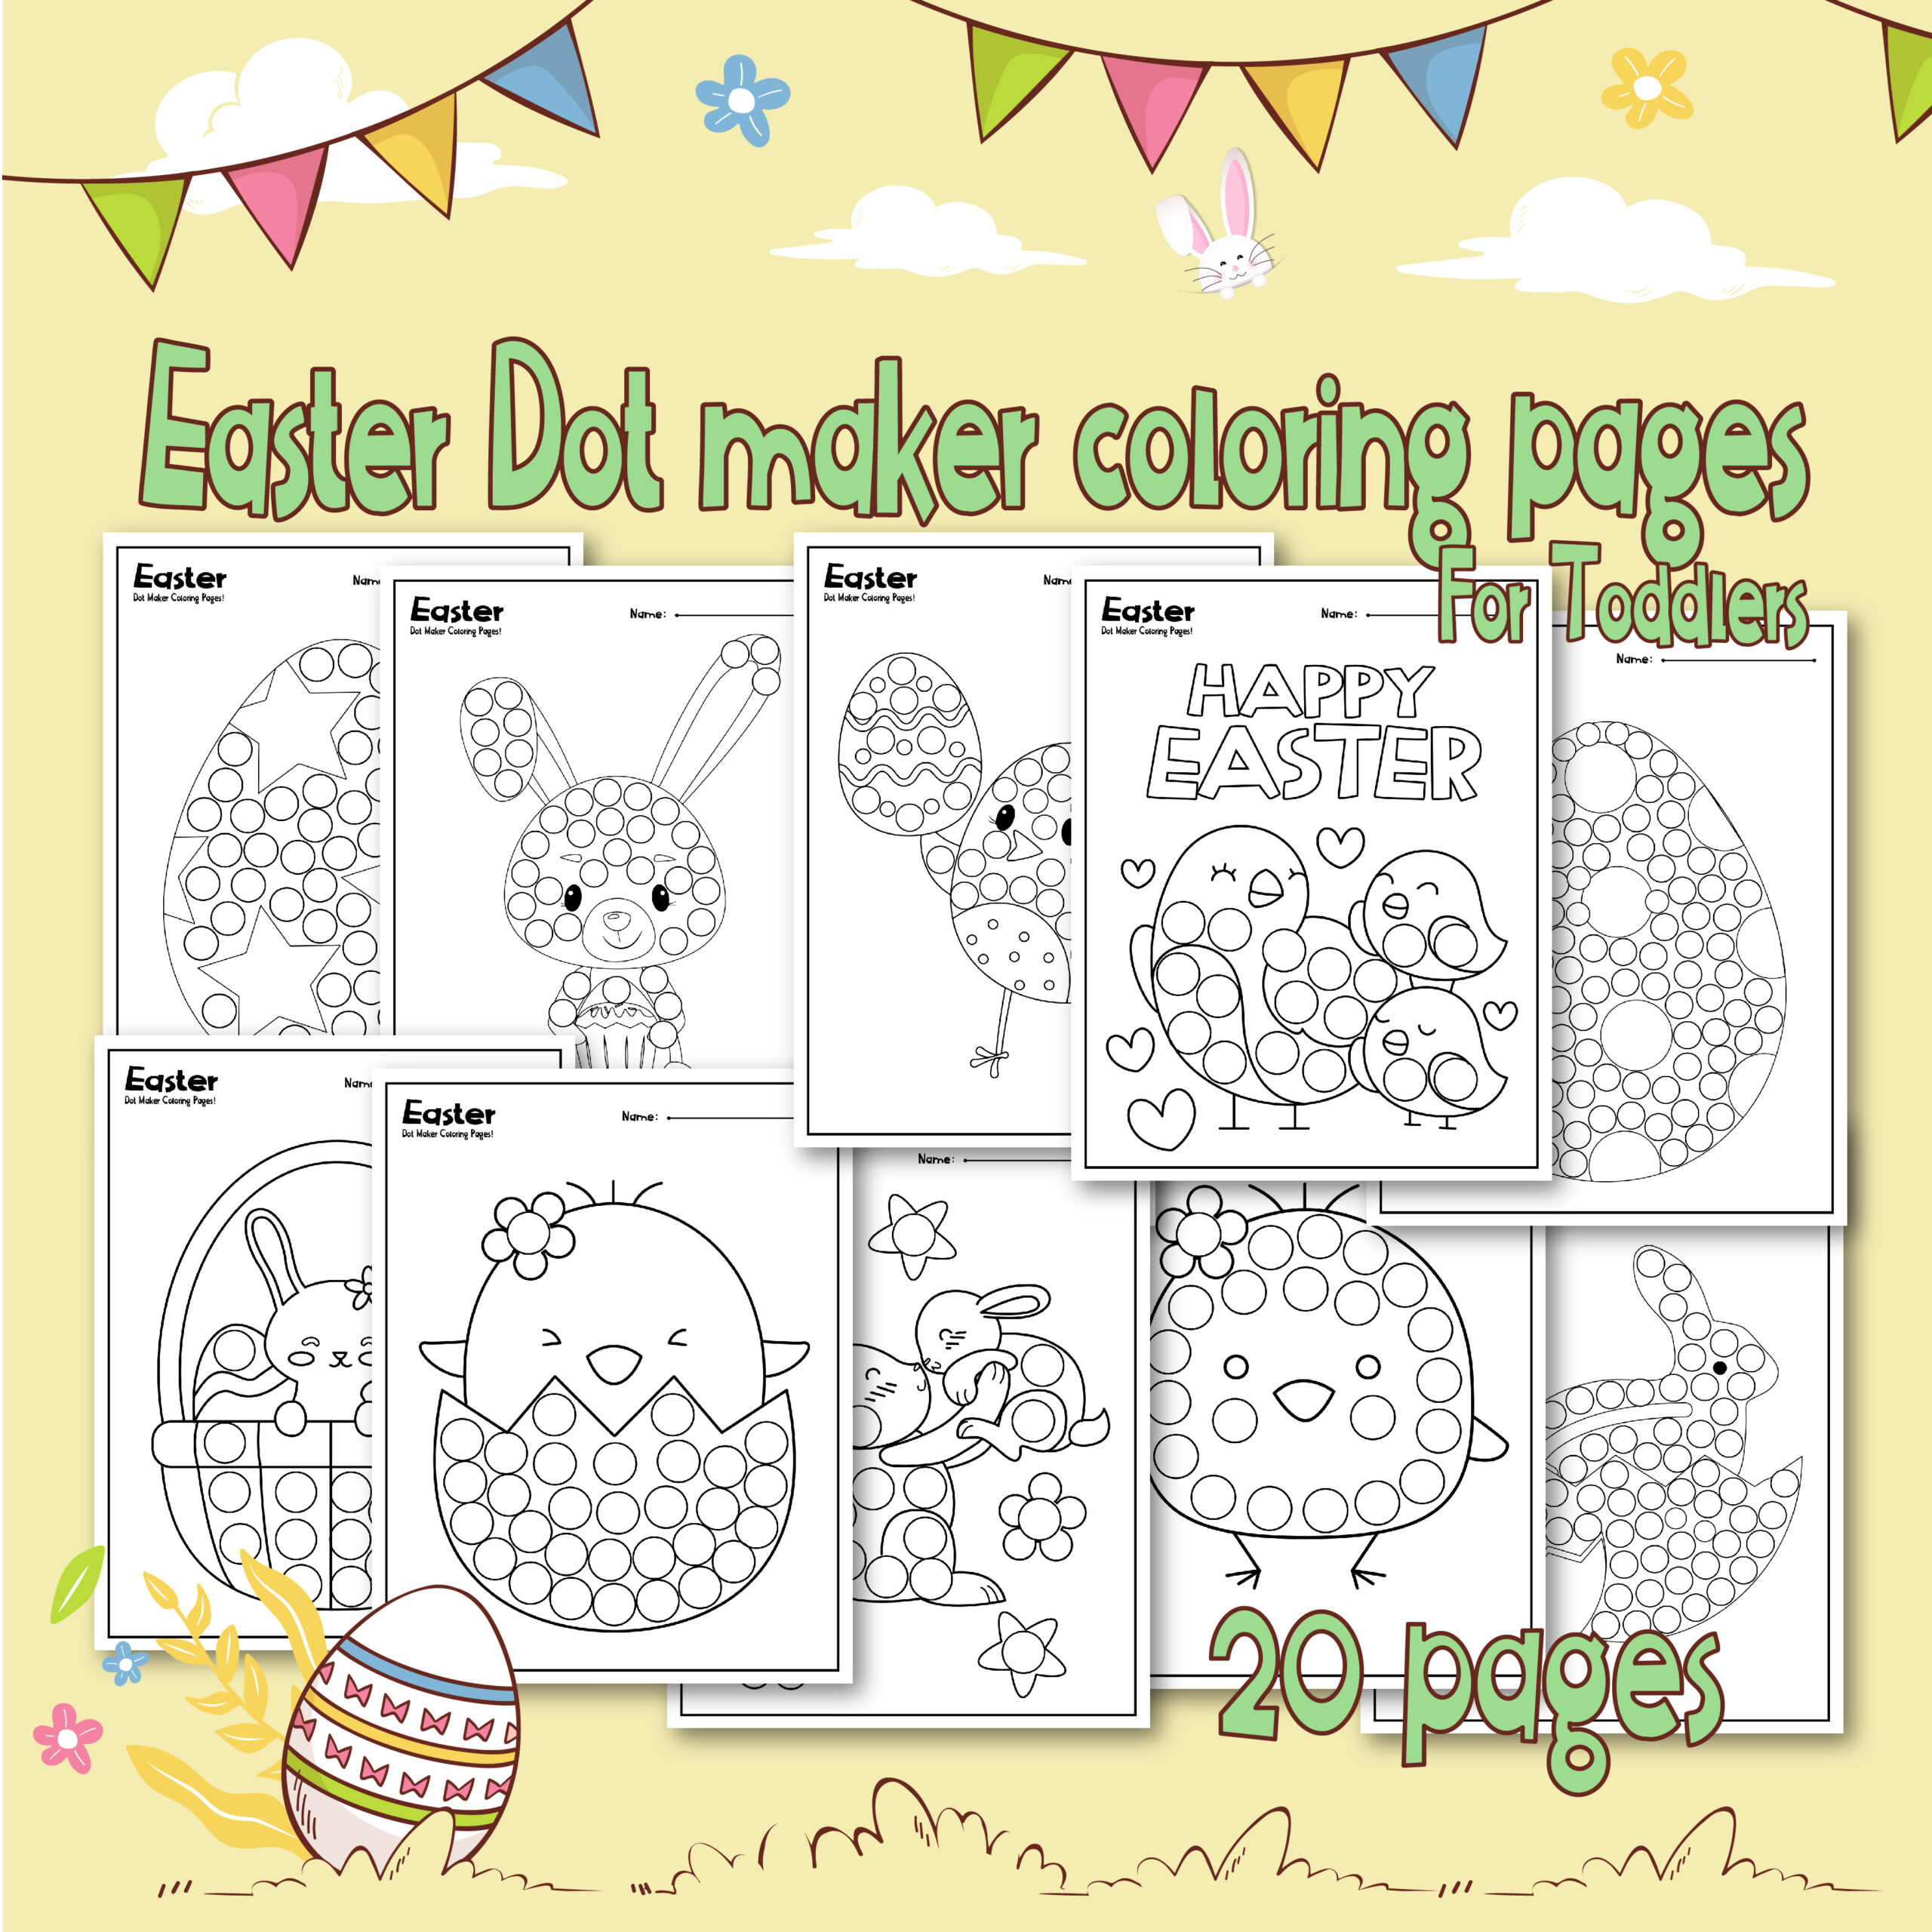 Easter dot maker coloring pages for toddlers made by teachers